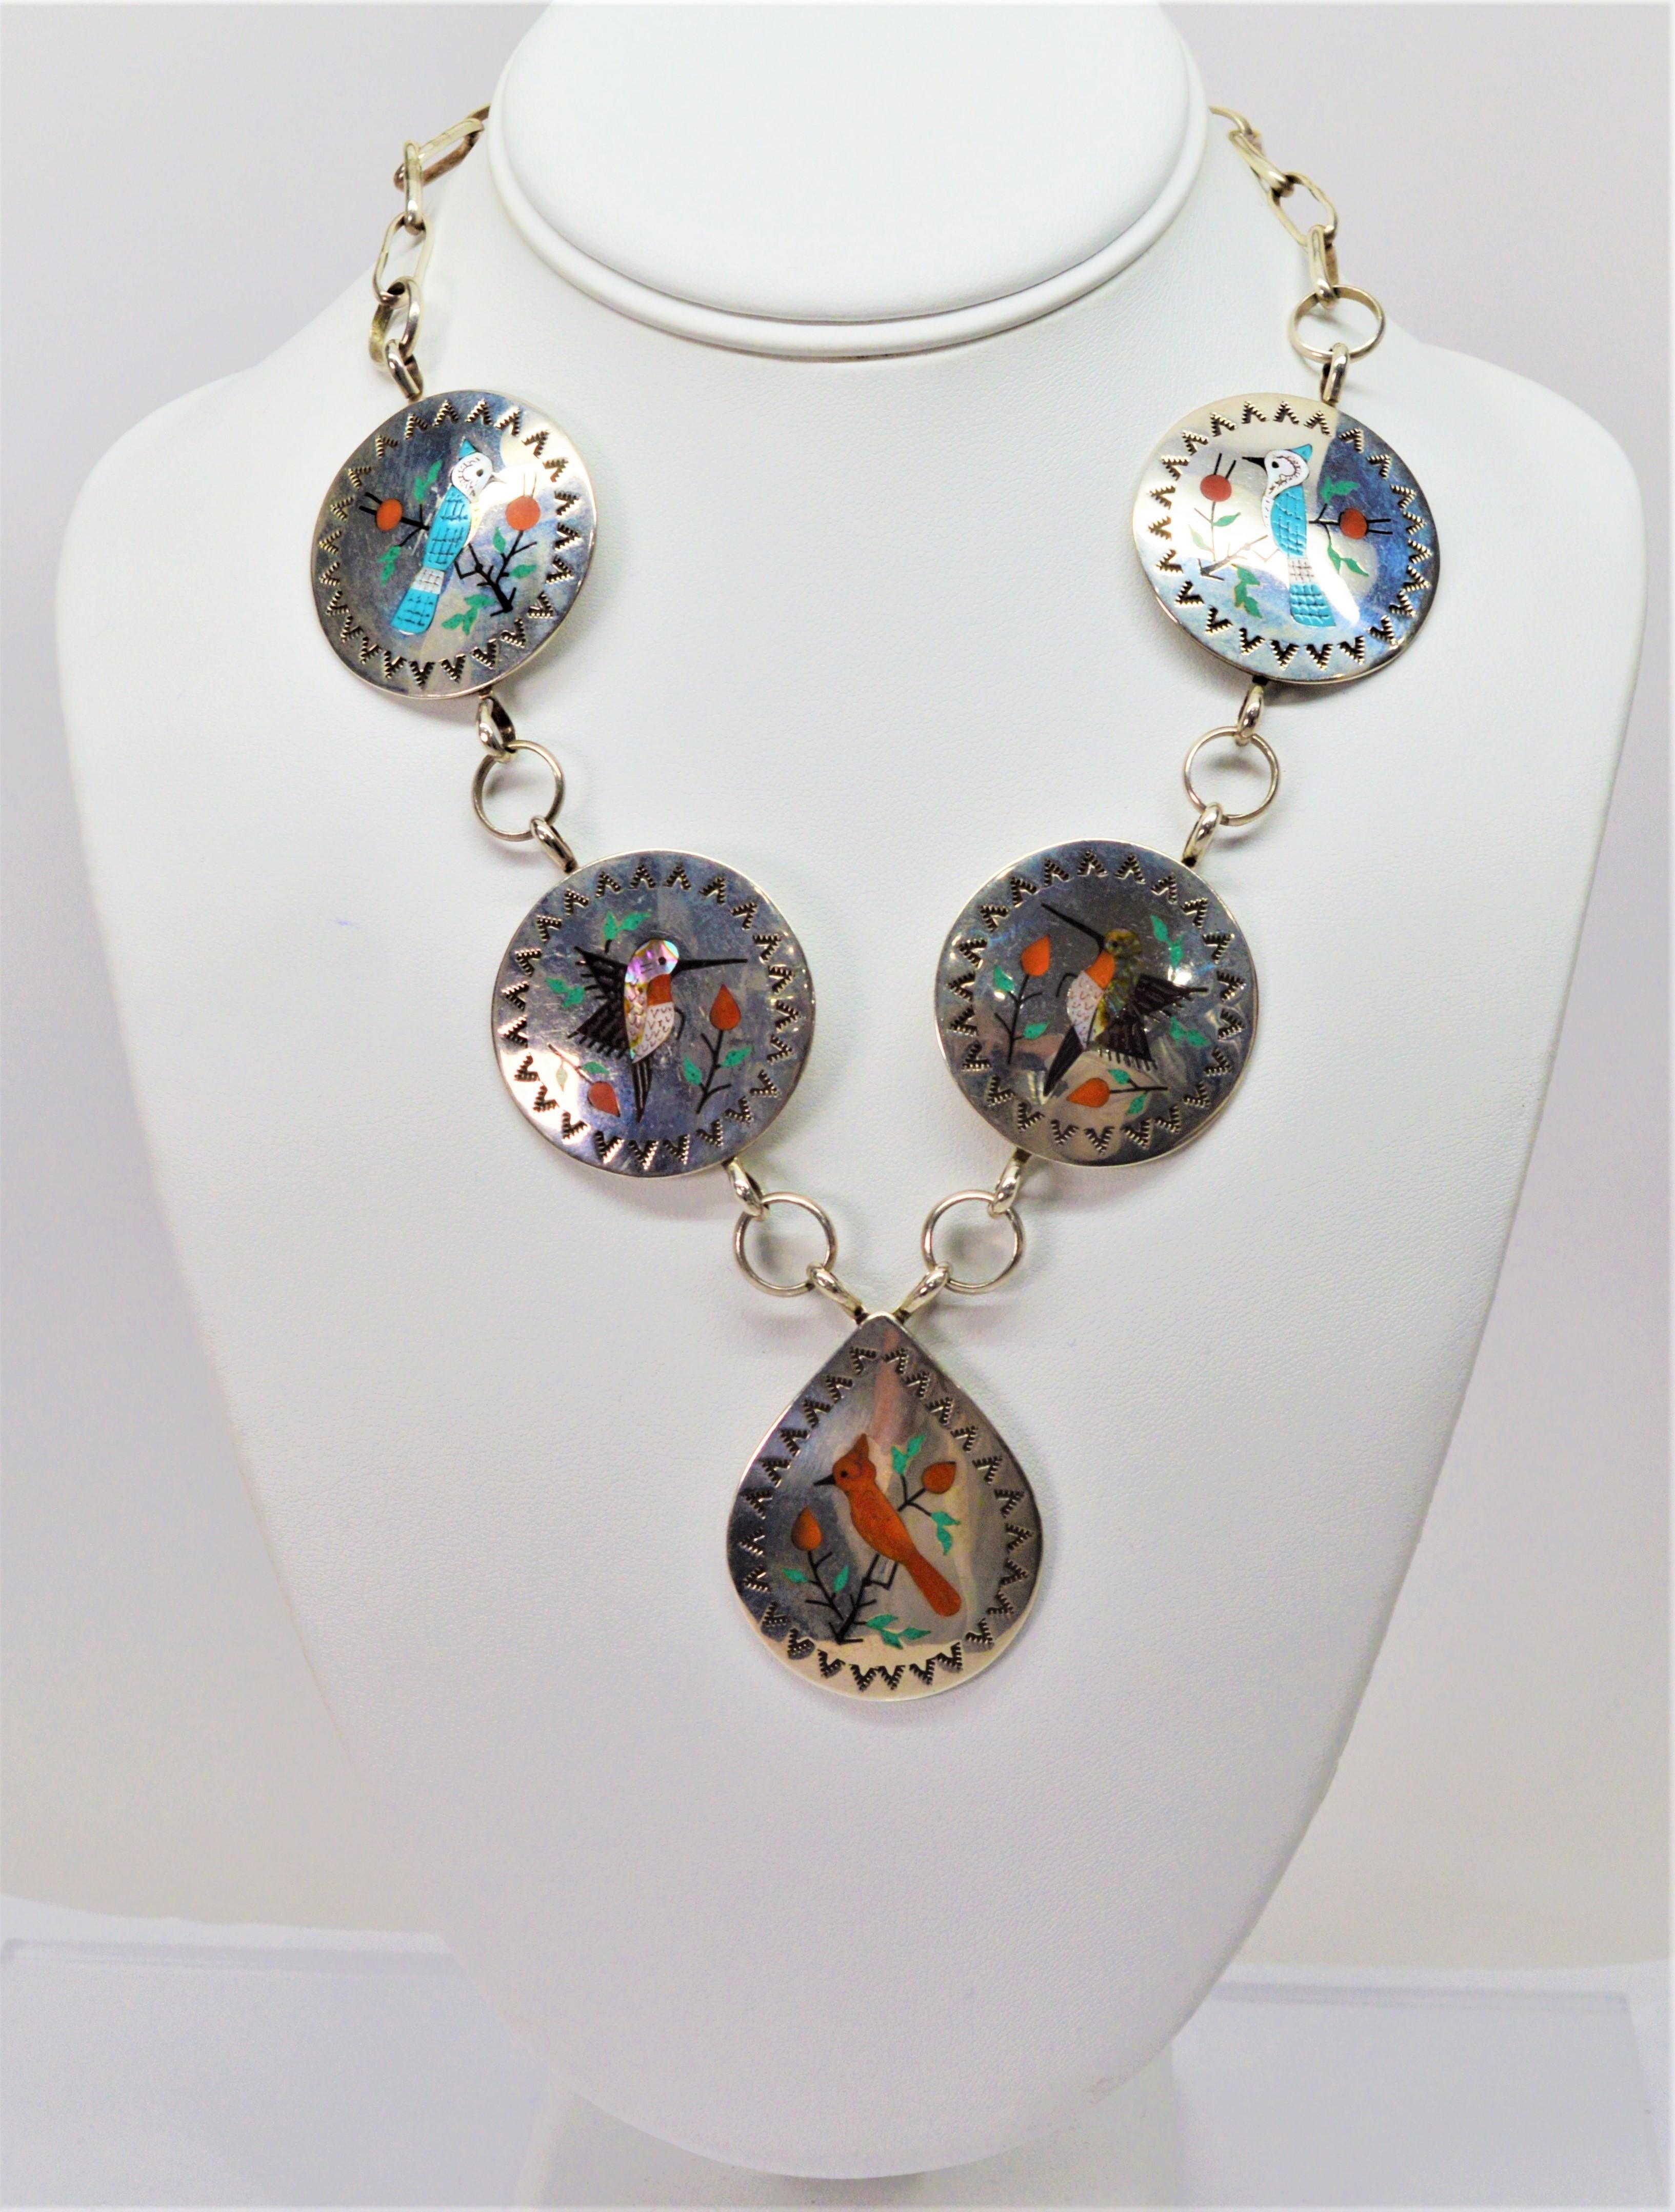 Raymond Boyd is a gifted and well respected Navajo silversmith specializing in Zuni style jewelry, especially in intricate bird inlay.  This handmade, signed necklace made in the 1960's is comprised of five sterling silver discs each displaying a